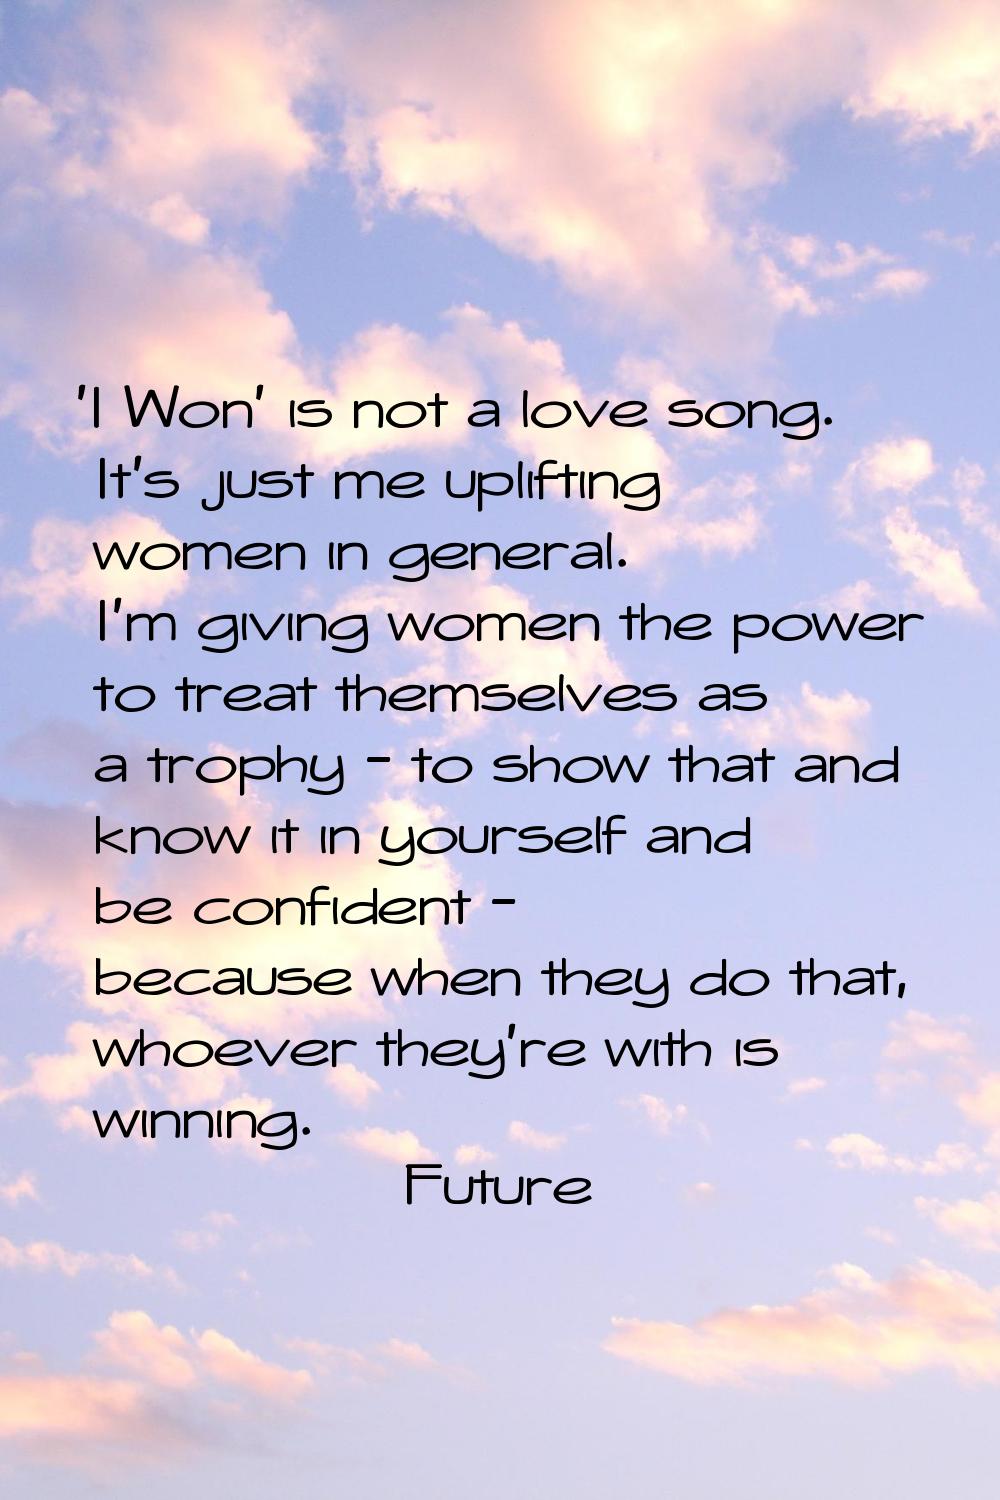 'I Won' is not a love song. It's just me uplifting women in general. I'm giving women the power to 